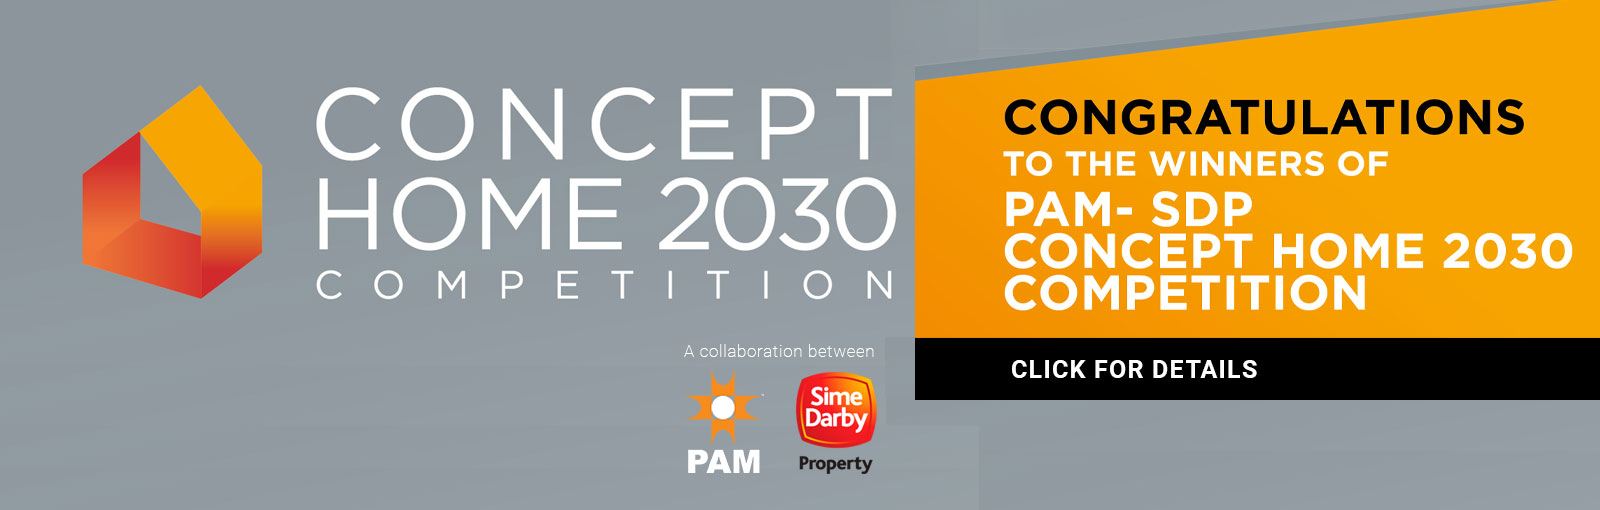 Concept Home 2030 Competition